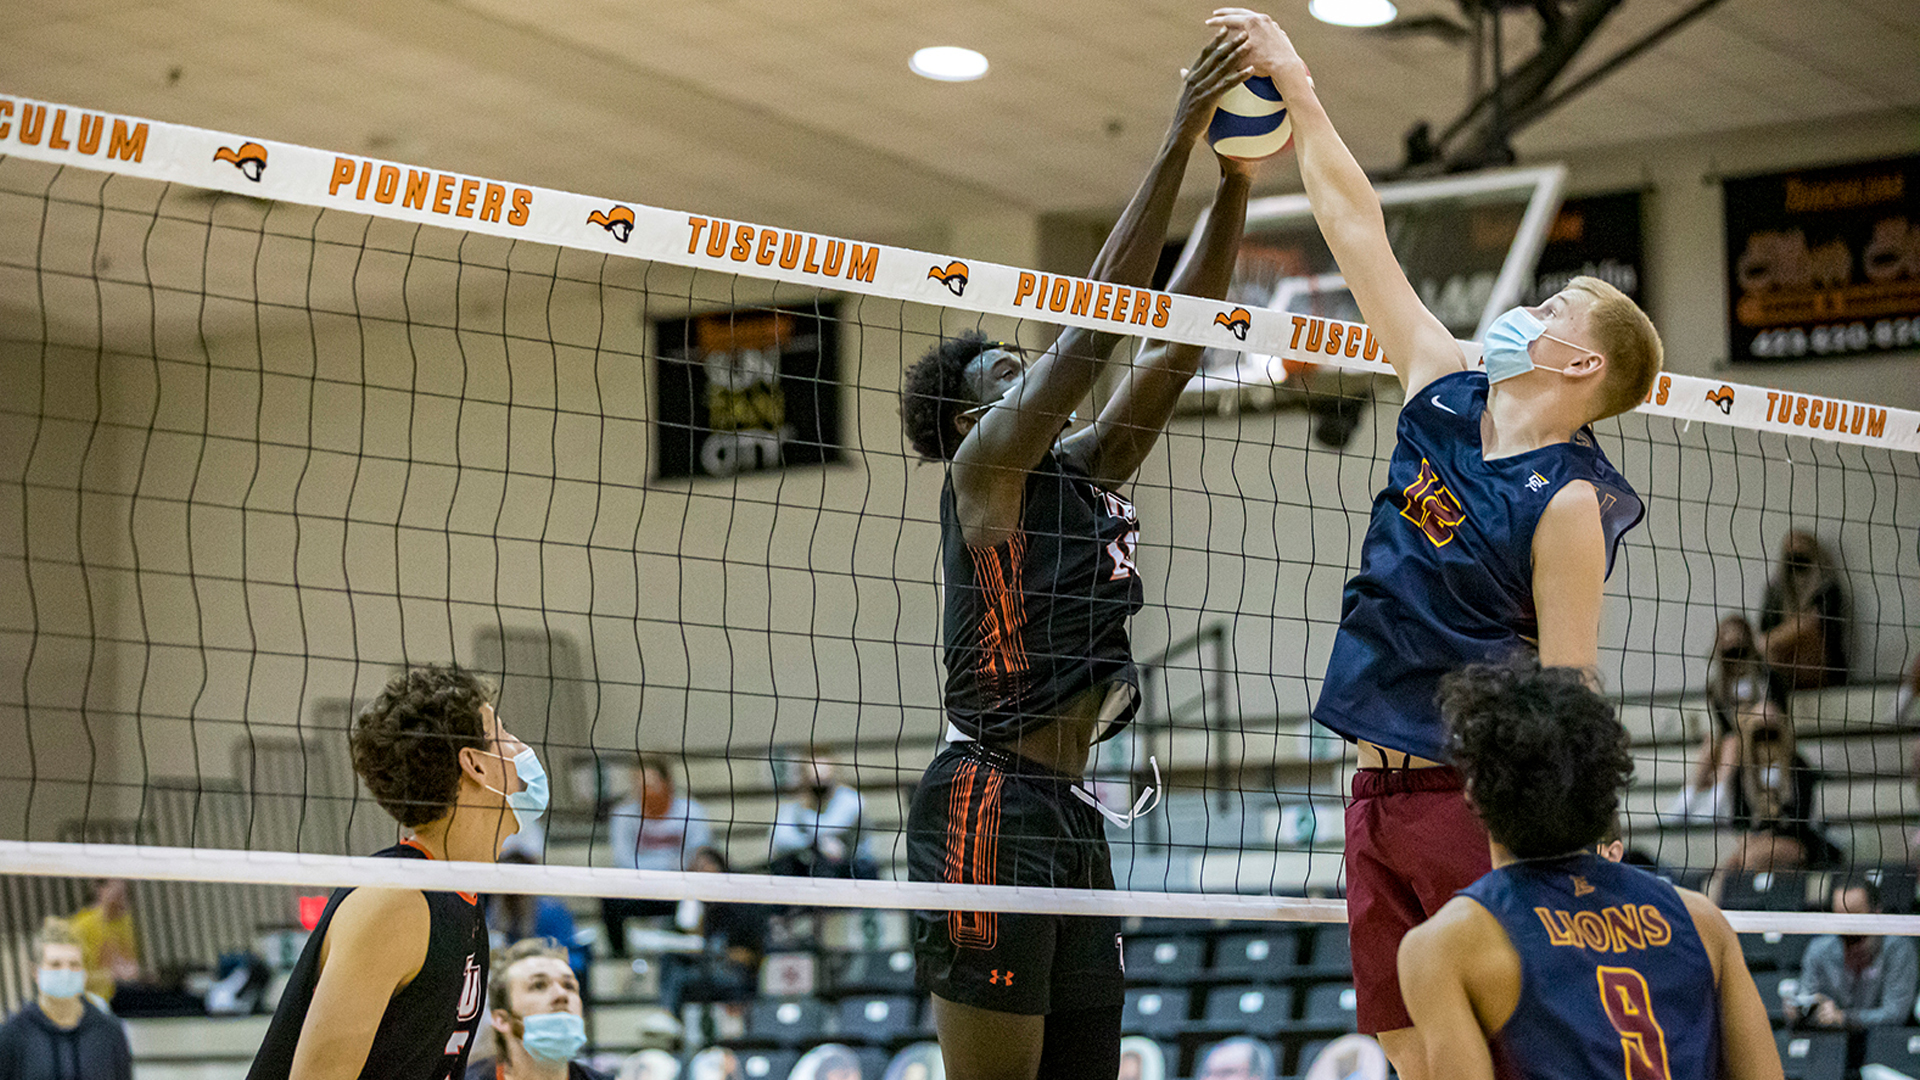 Shaphar Grant records one of his two block solos in Wednesday's match with Emmanuel (Photo by Chuck Williams)